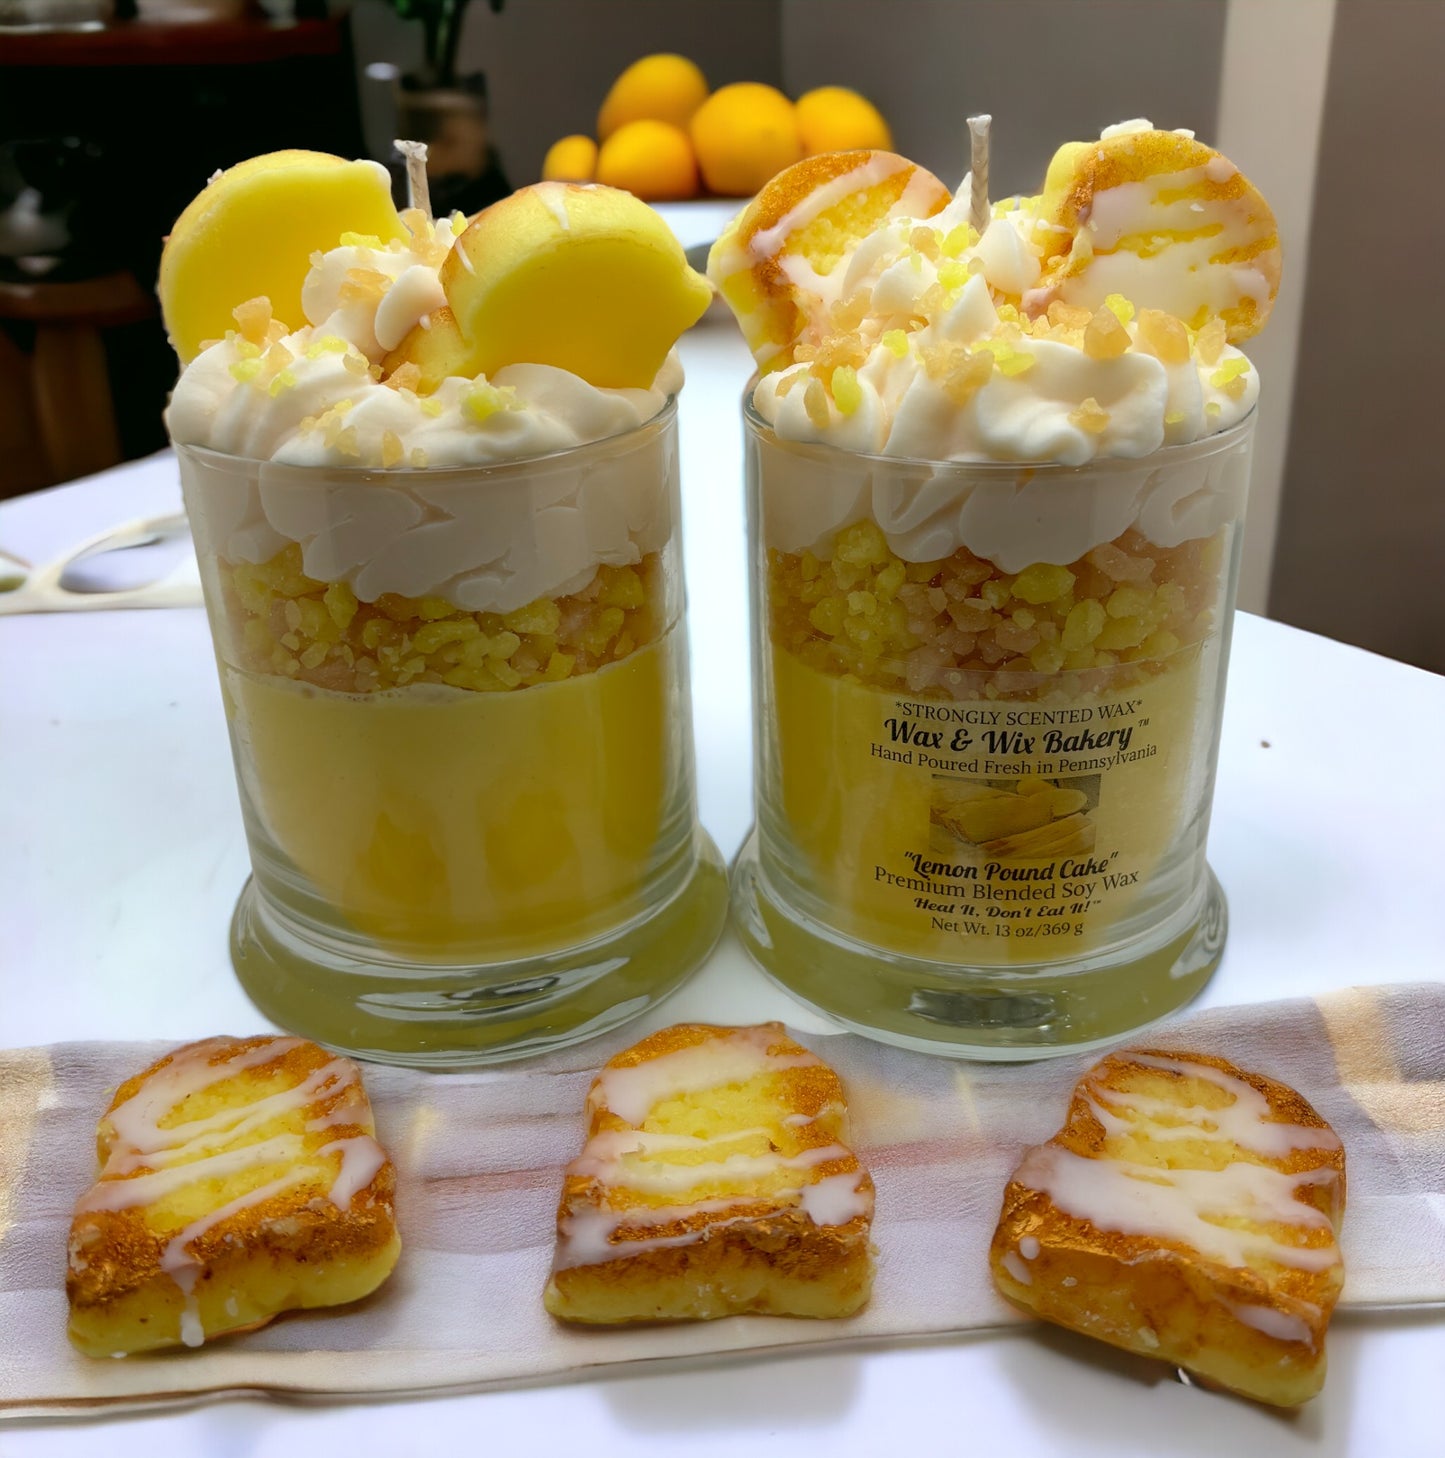 Lemon Pound Cake Candle. 13 Ounce. Pound Cake. Soy Wax Candle. Strongly Scented Candle.